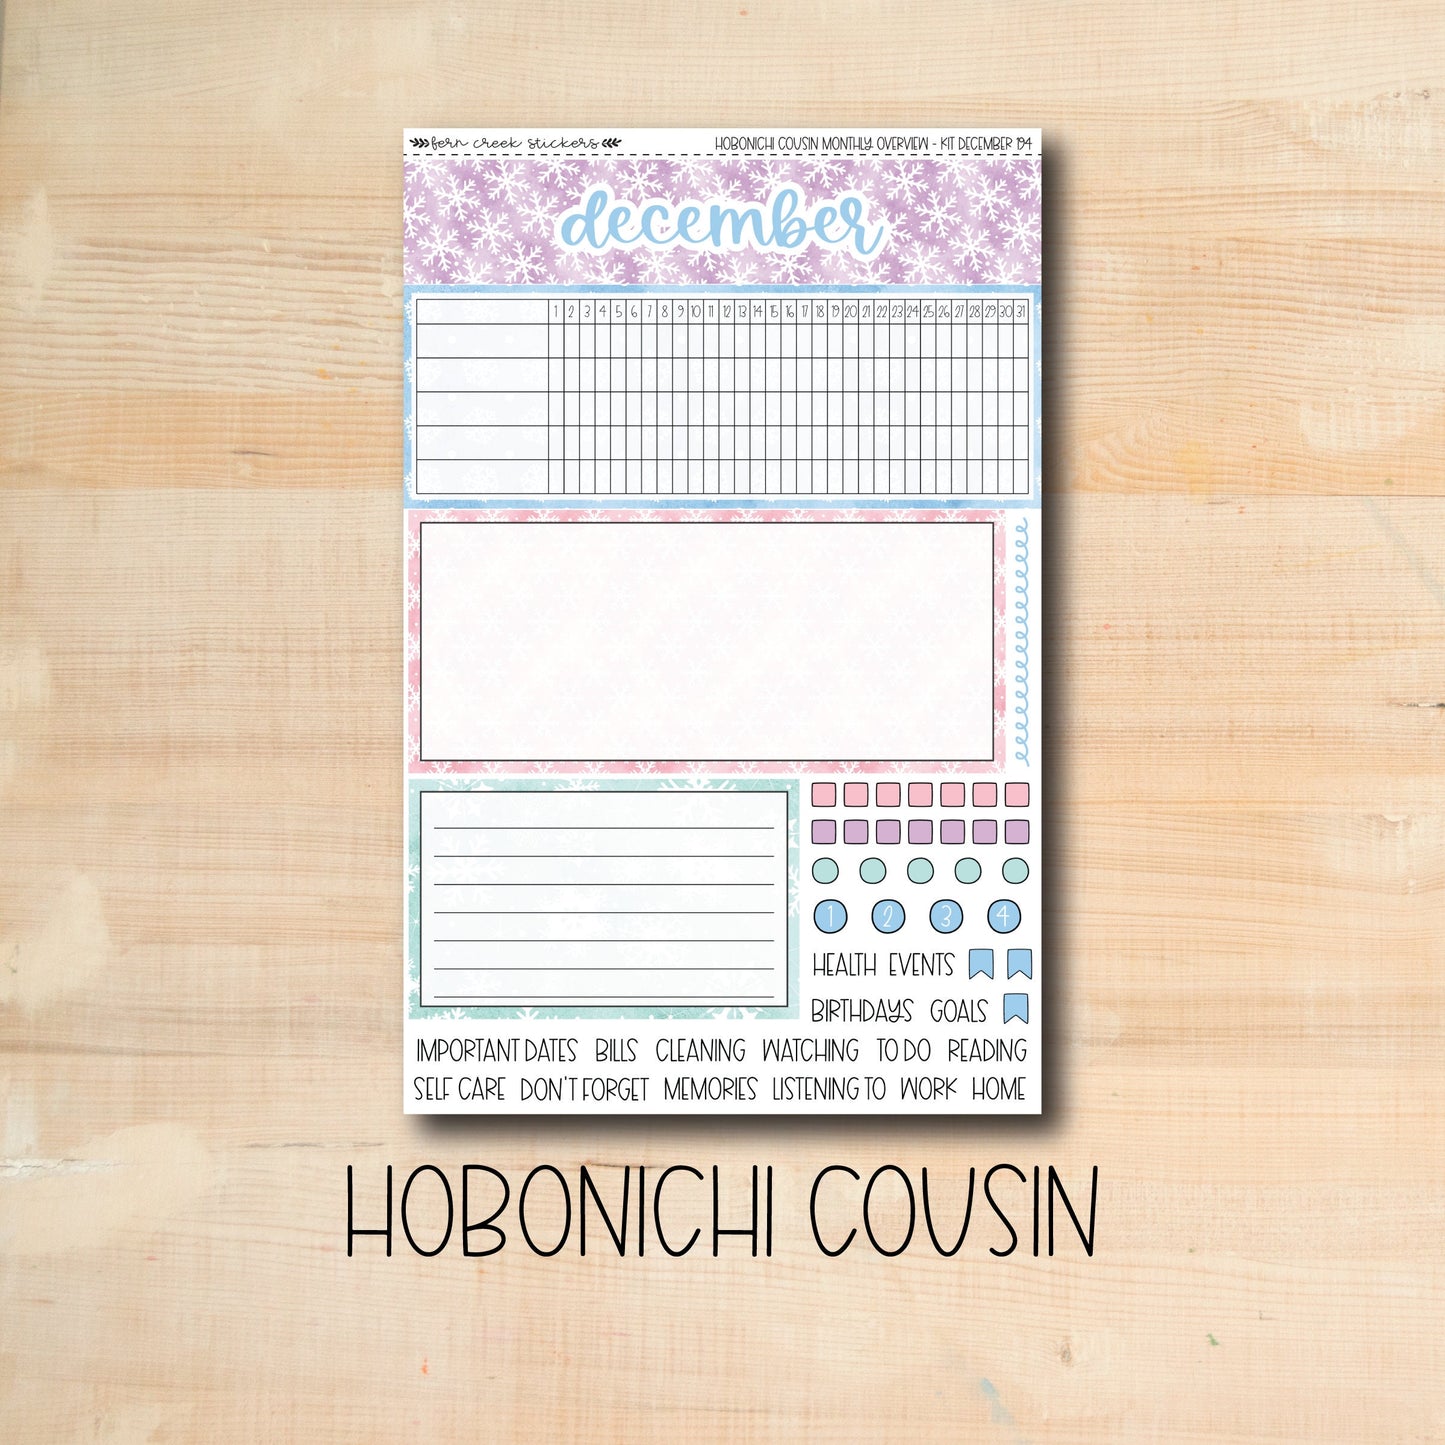 HCMO-194 || WINTER MAGIC December Hobonichi Cousin monthly overview